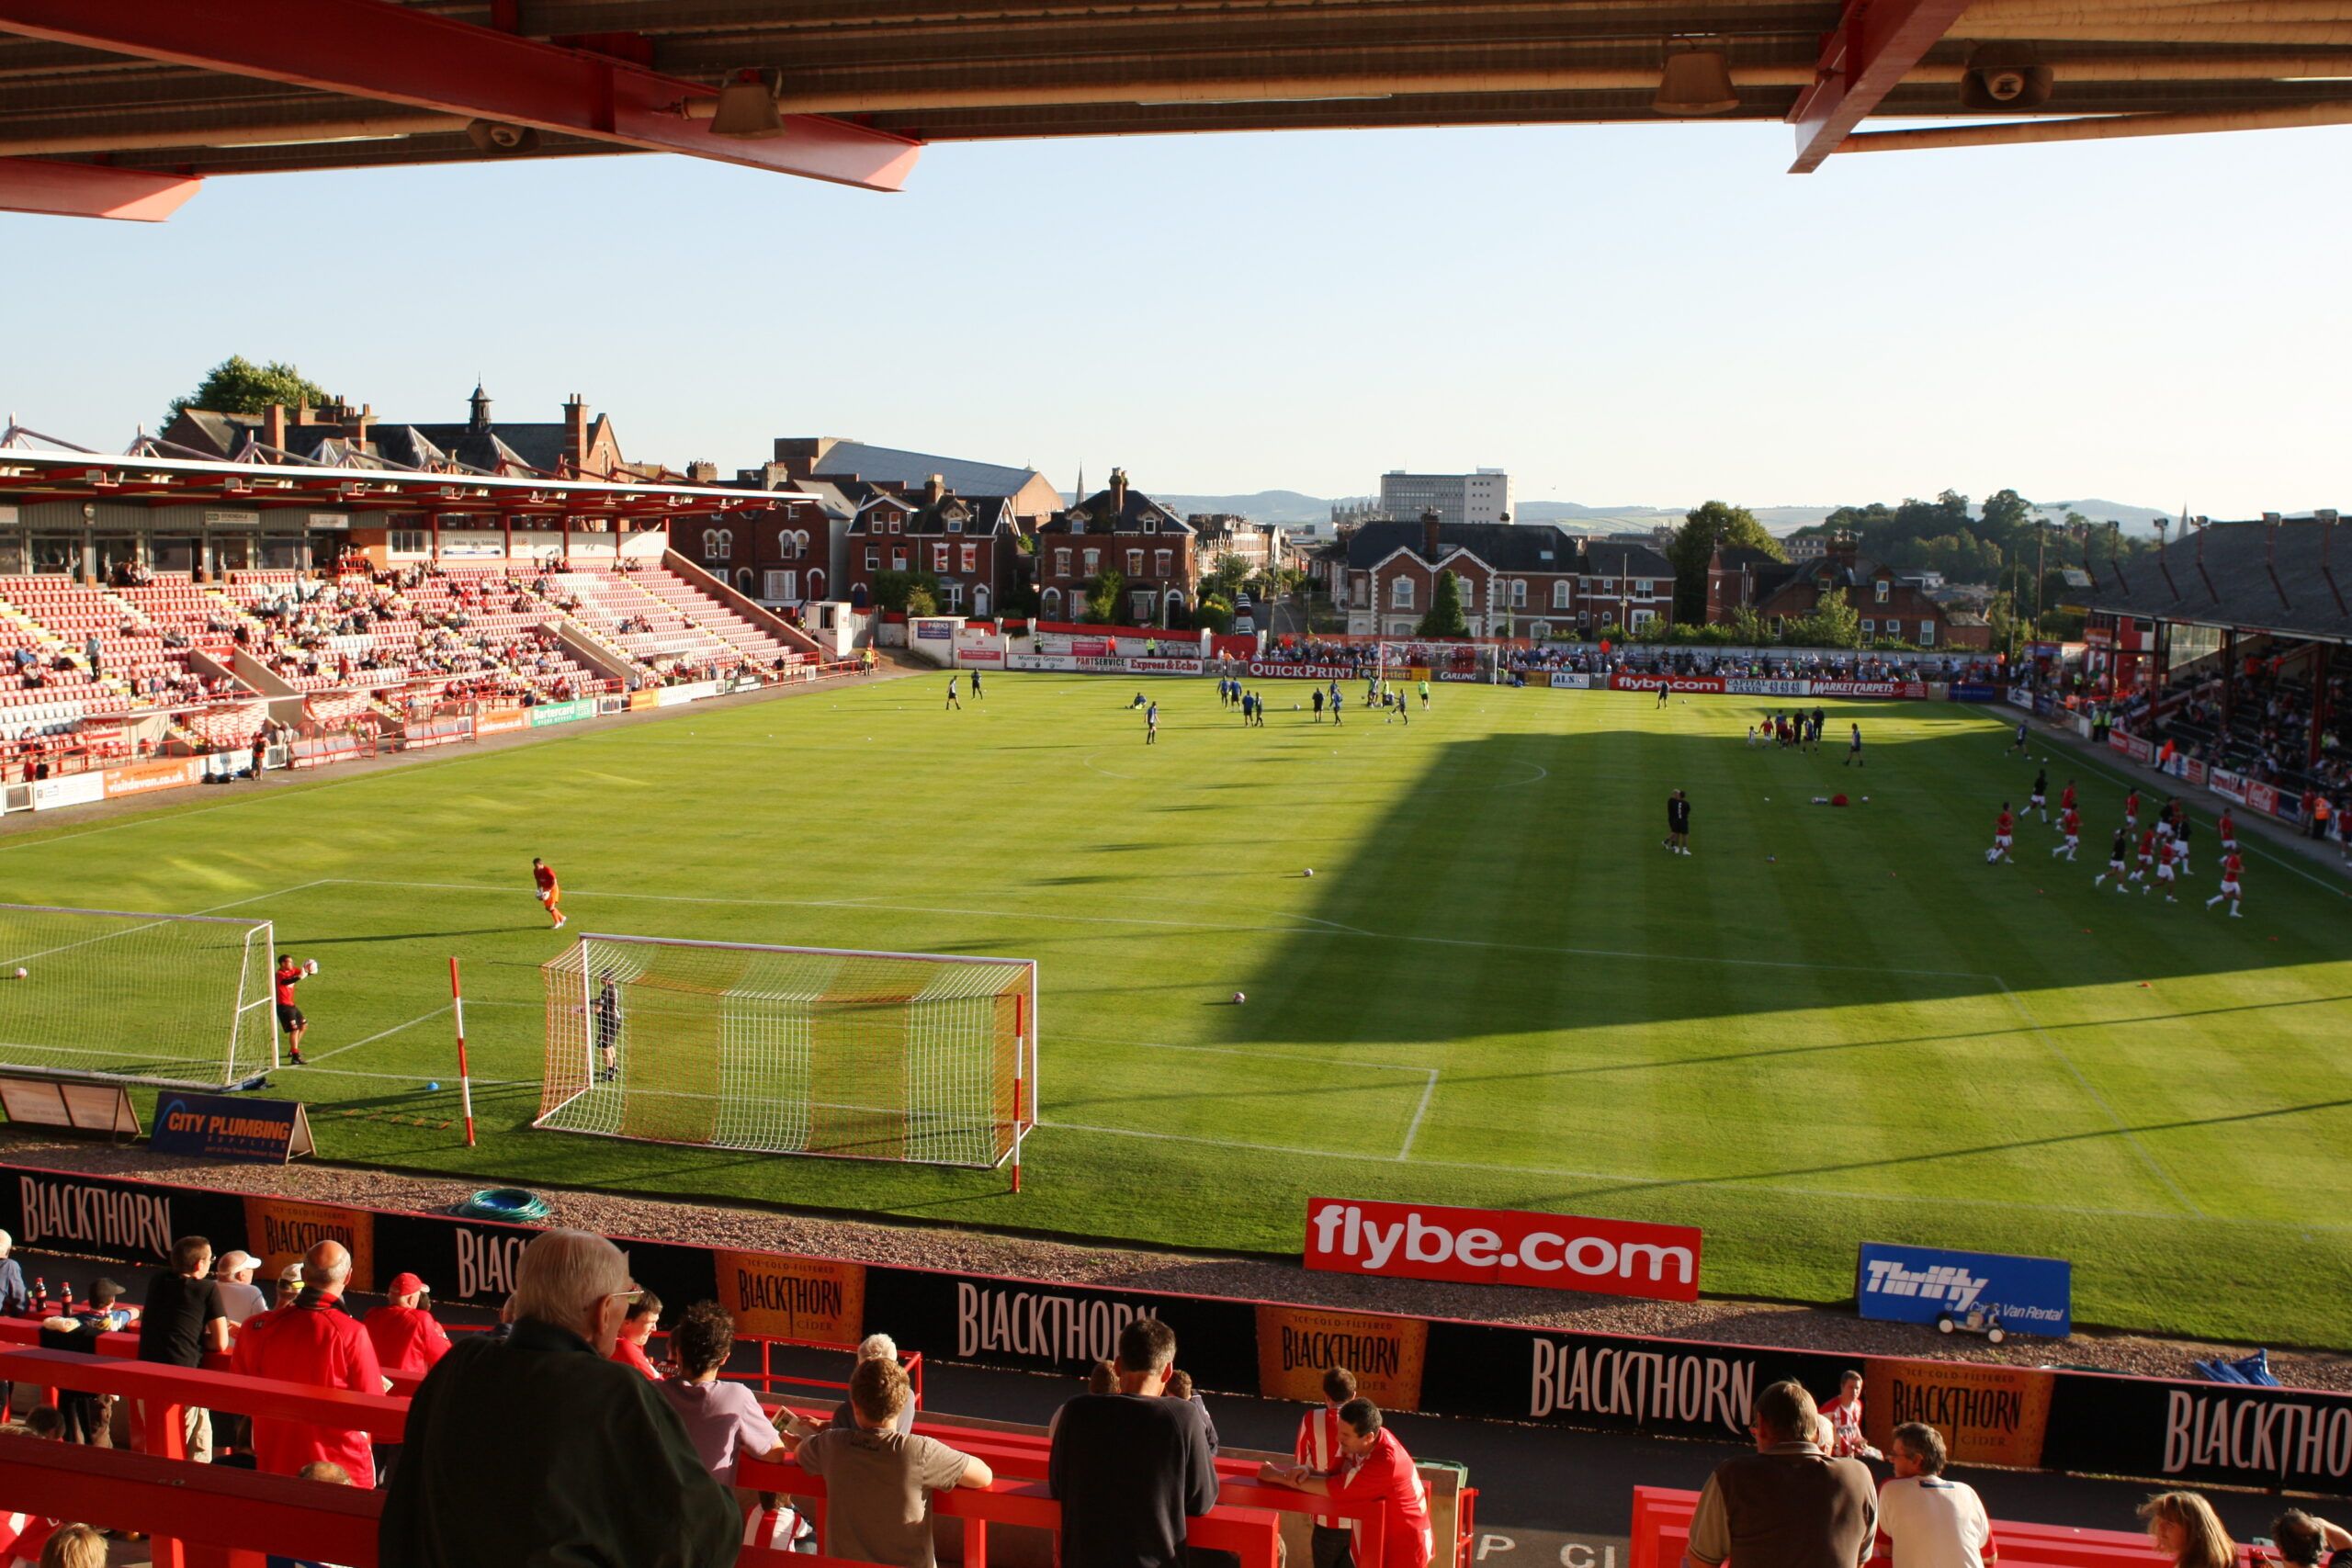 Football - Exeter City v Queens Park Rangers - Carling Cup First Round - St James Park - 09/10 - 11/8/09 
General View of St James Park - Exeter City Stadium 
Mandatory Credit: Action Images / Peter Cziborra